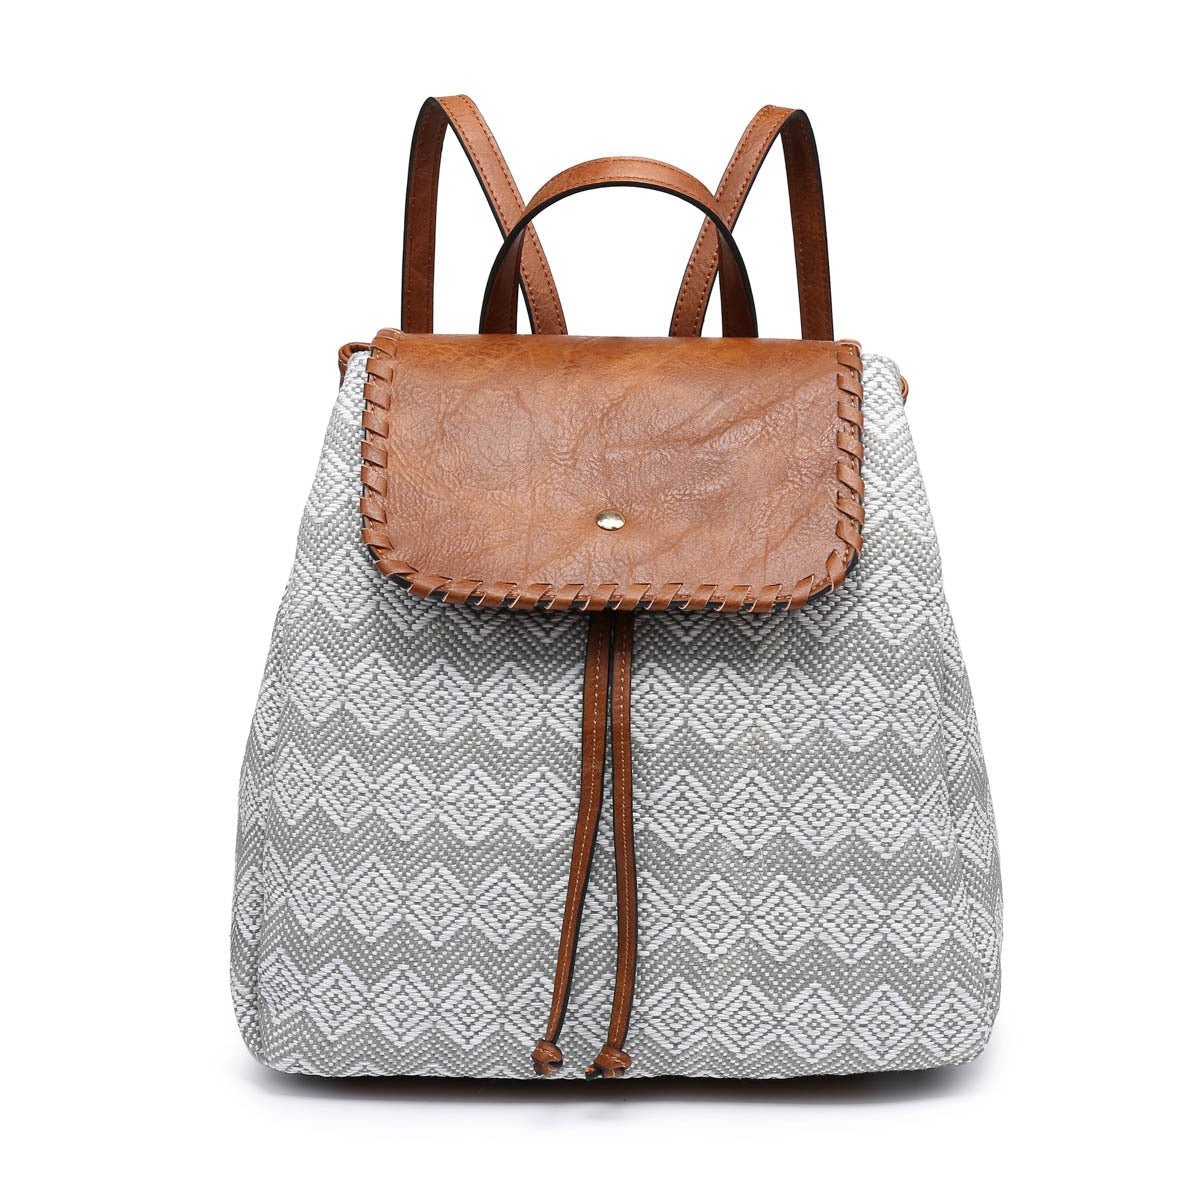 BP1919 Two Tone Textured Backpack w/ Whipstitch Design